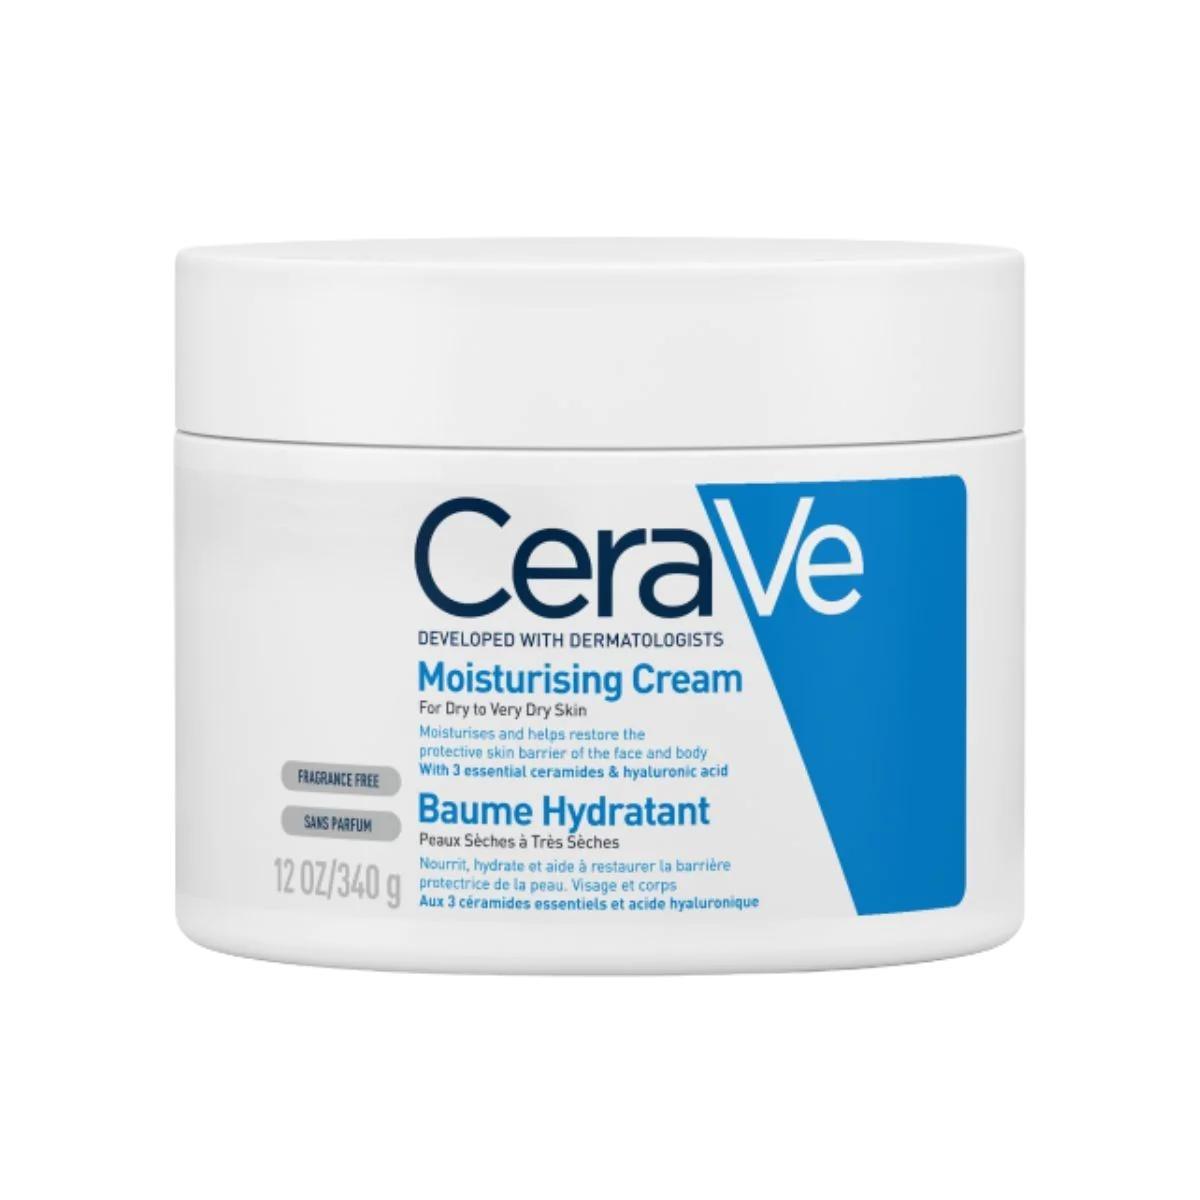 CeraVe Moisturising Cream Pot with Hyaluronic Acid & Ceramides for Dry to Very Dry Skin 340g